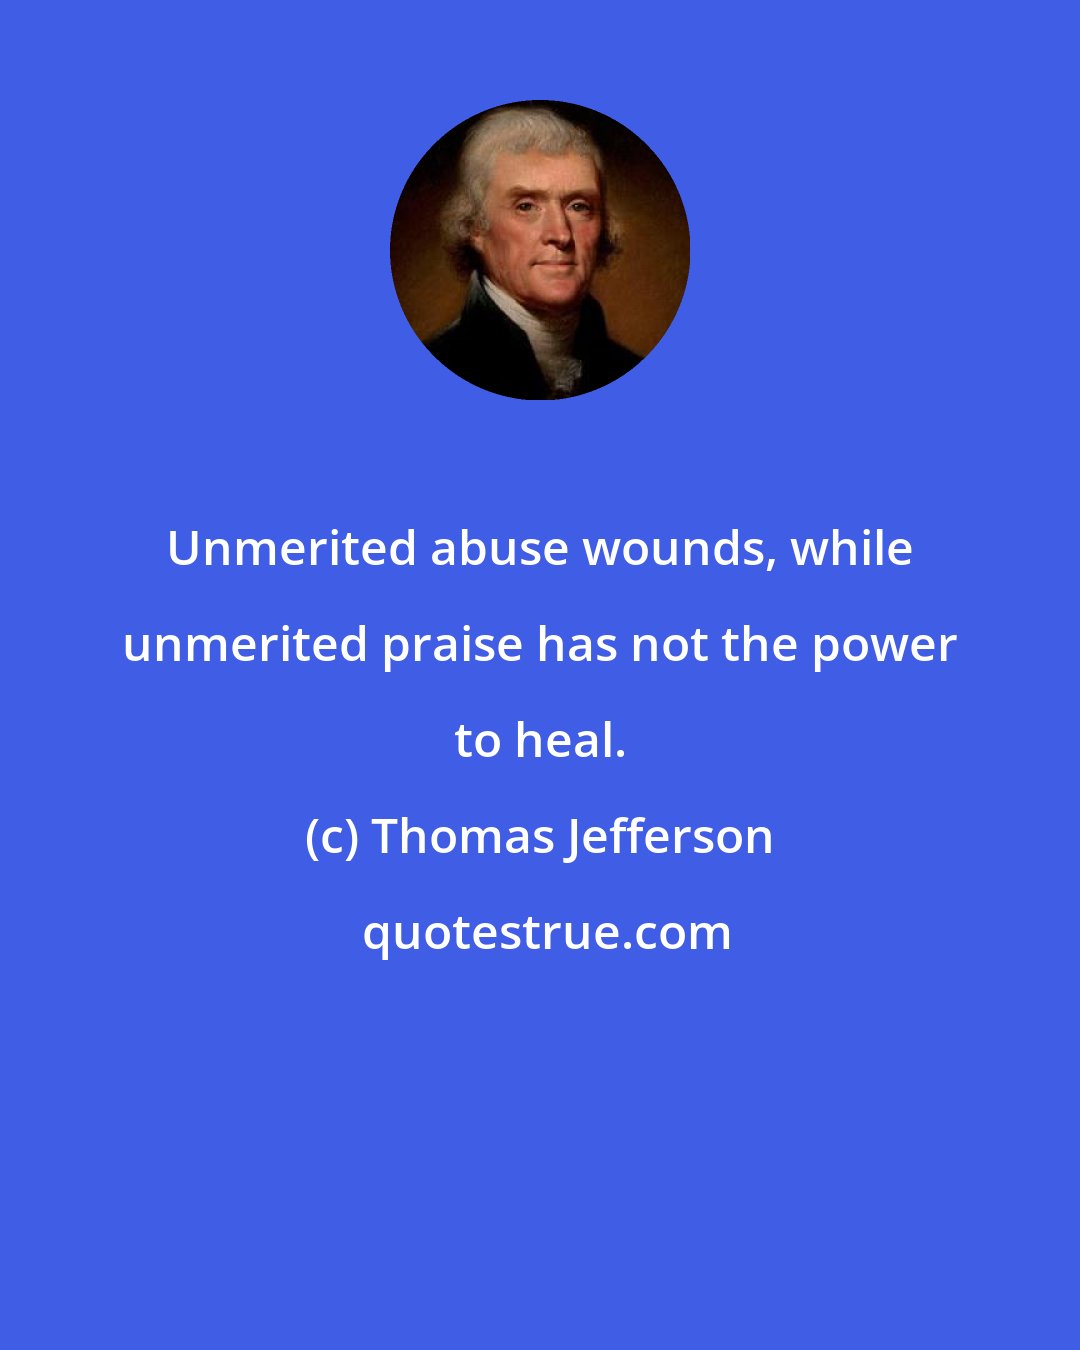 Thomas Jefferson: Unmerited abuse wounds, while unmerited praise has not the power to heal.